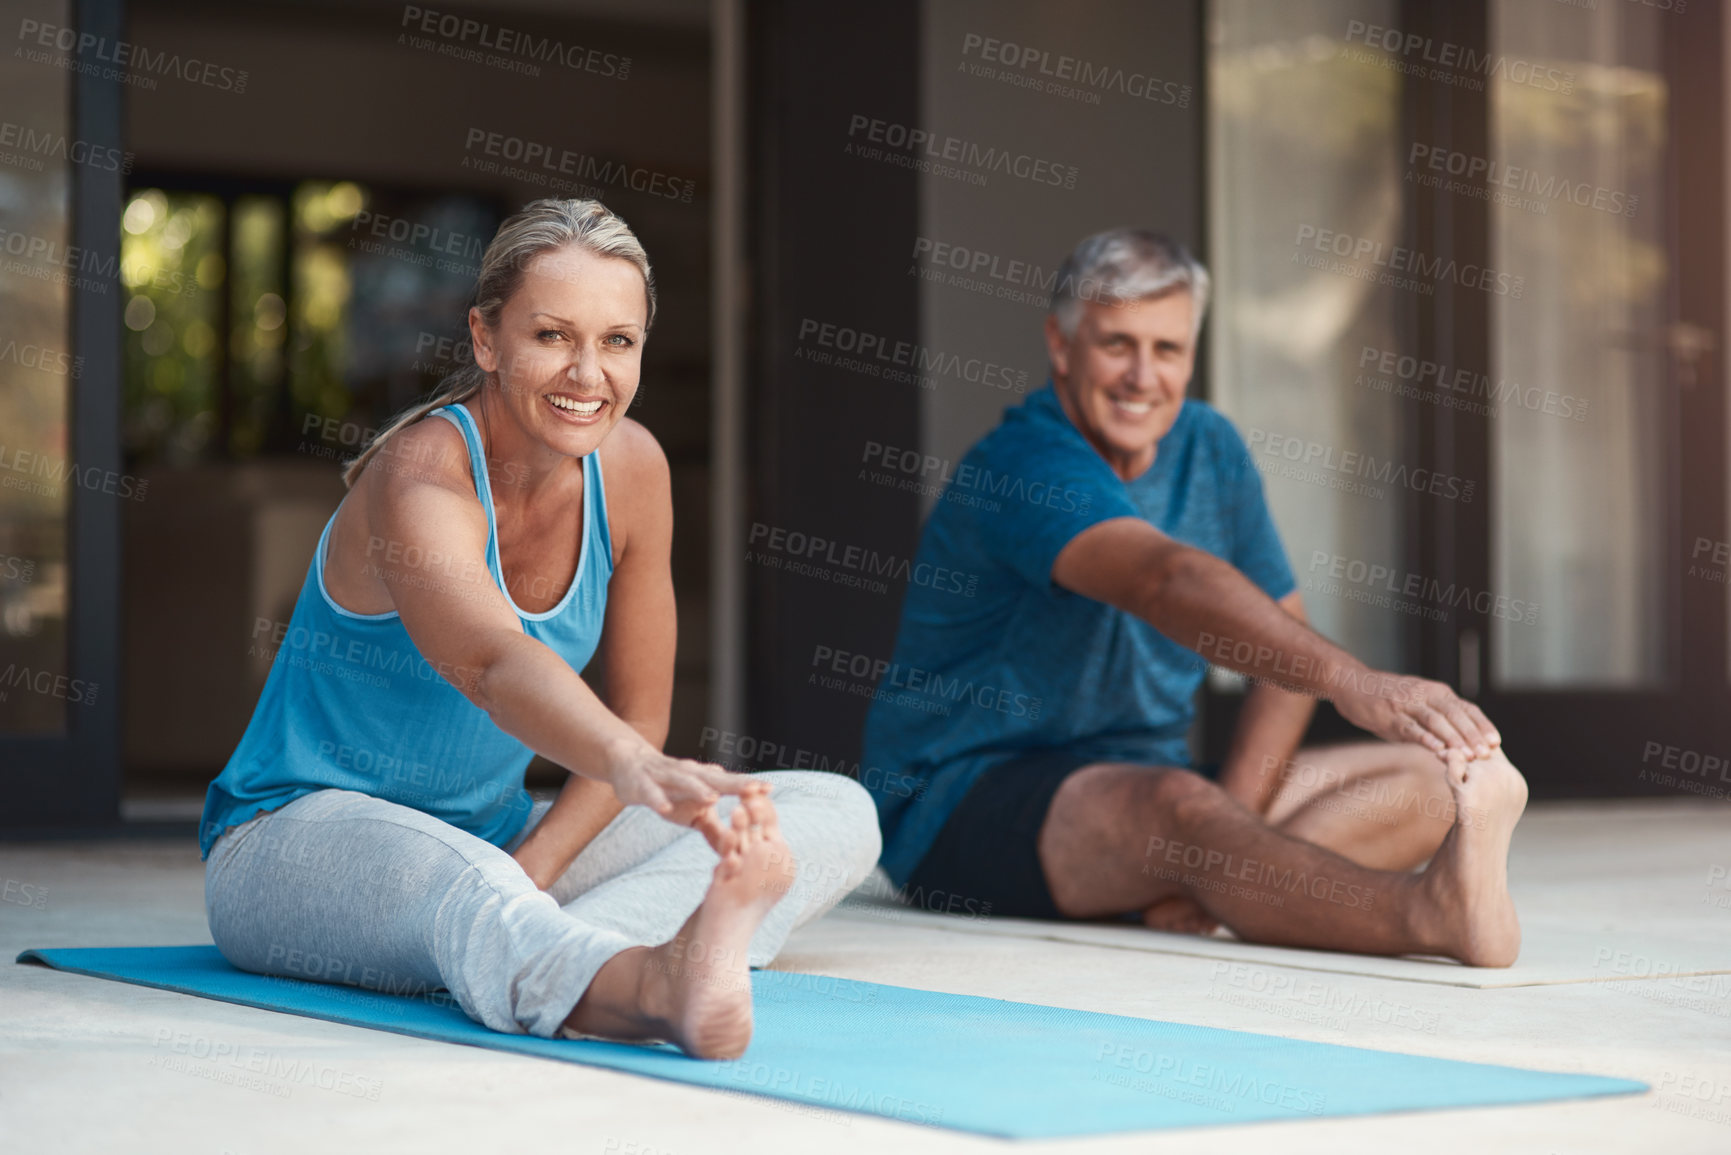 Buy stock photo Shot of a mature and happy couple stretching before they do yoga outside of their home